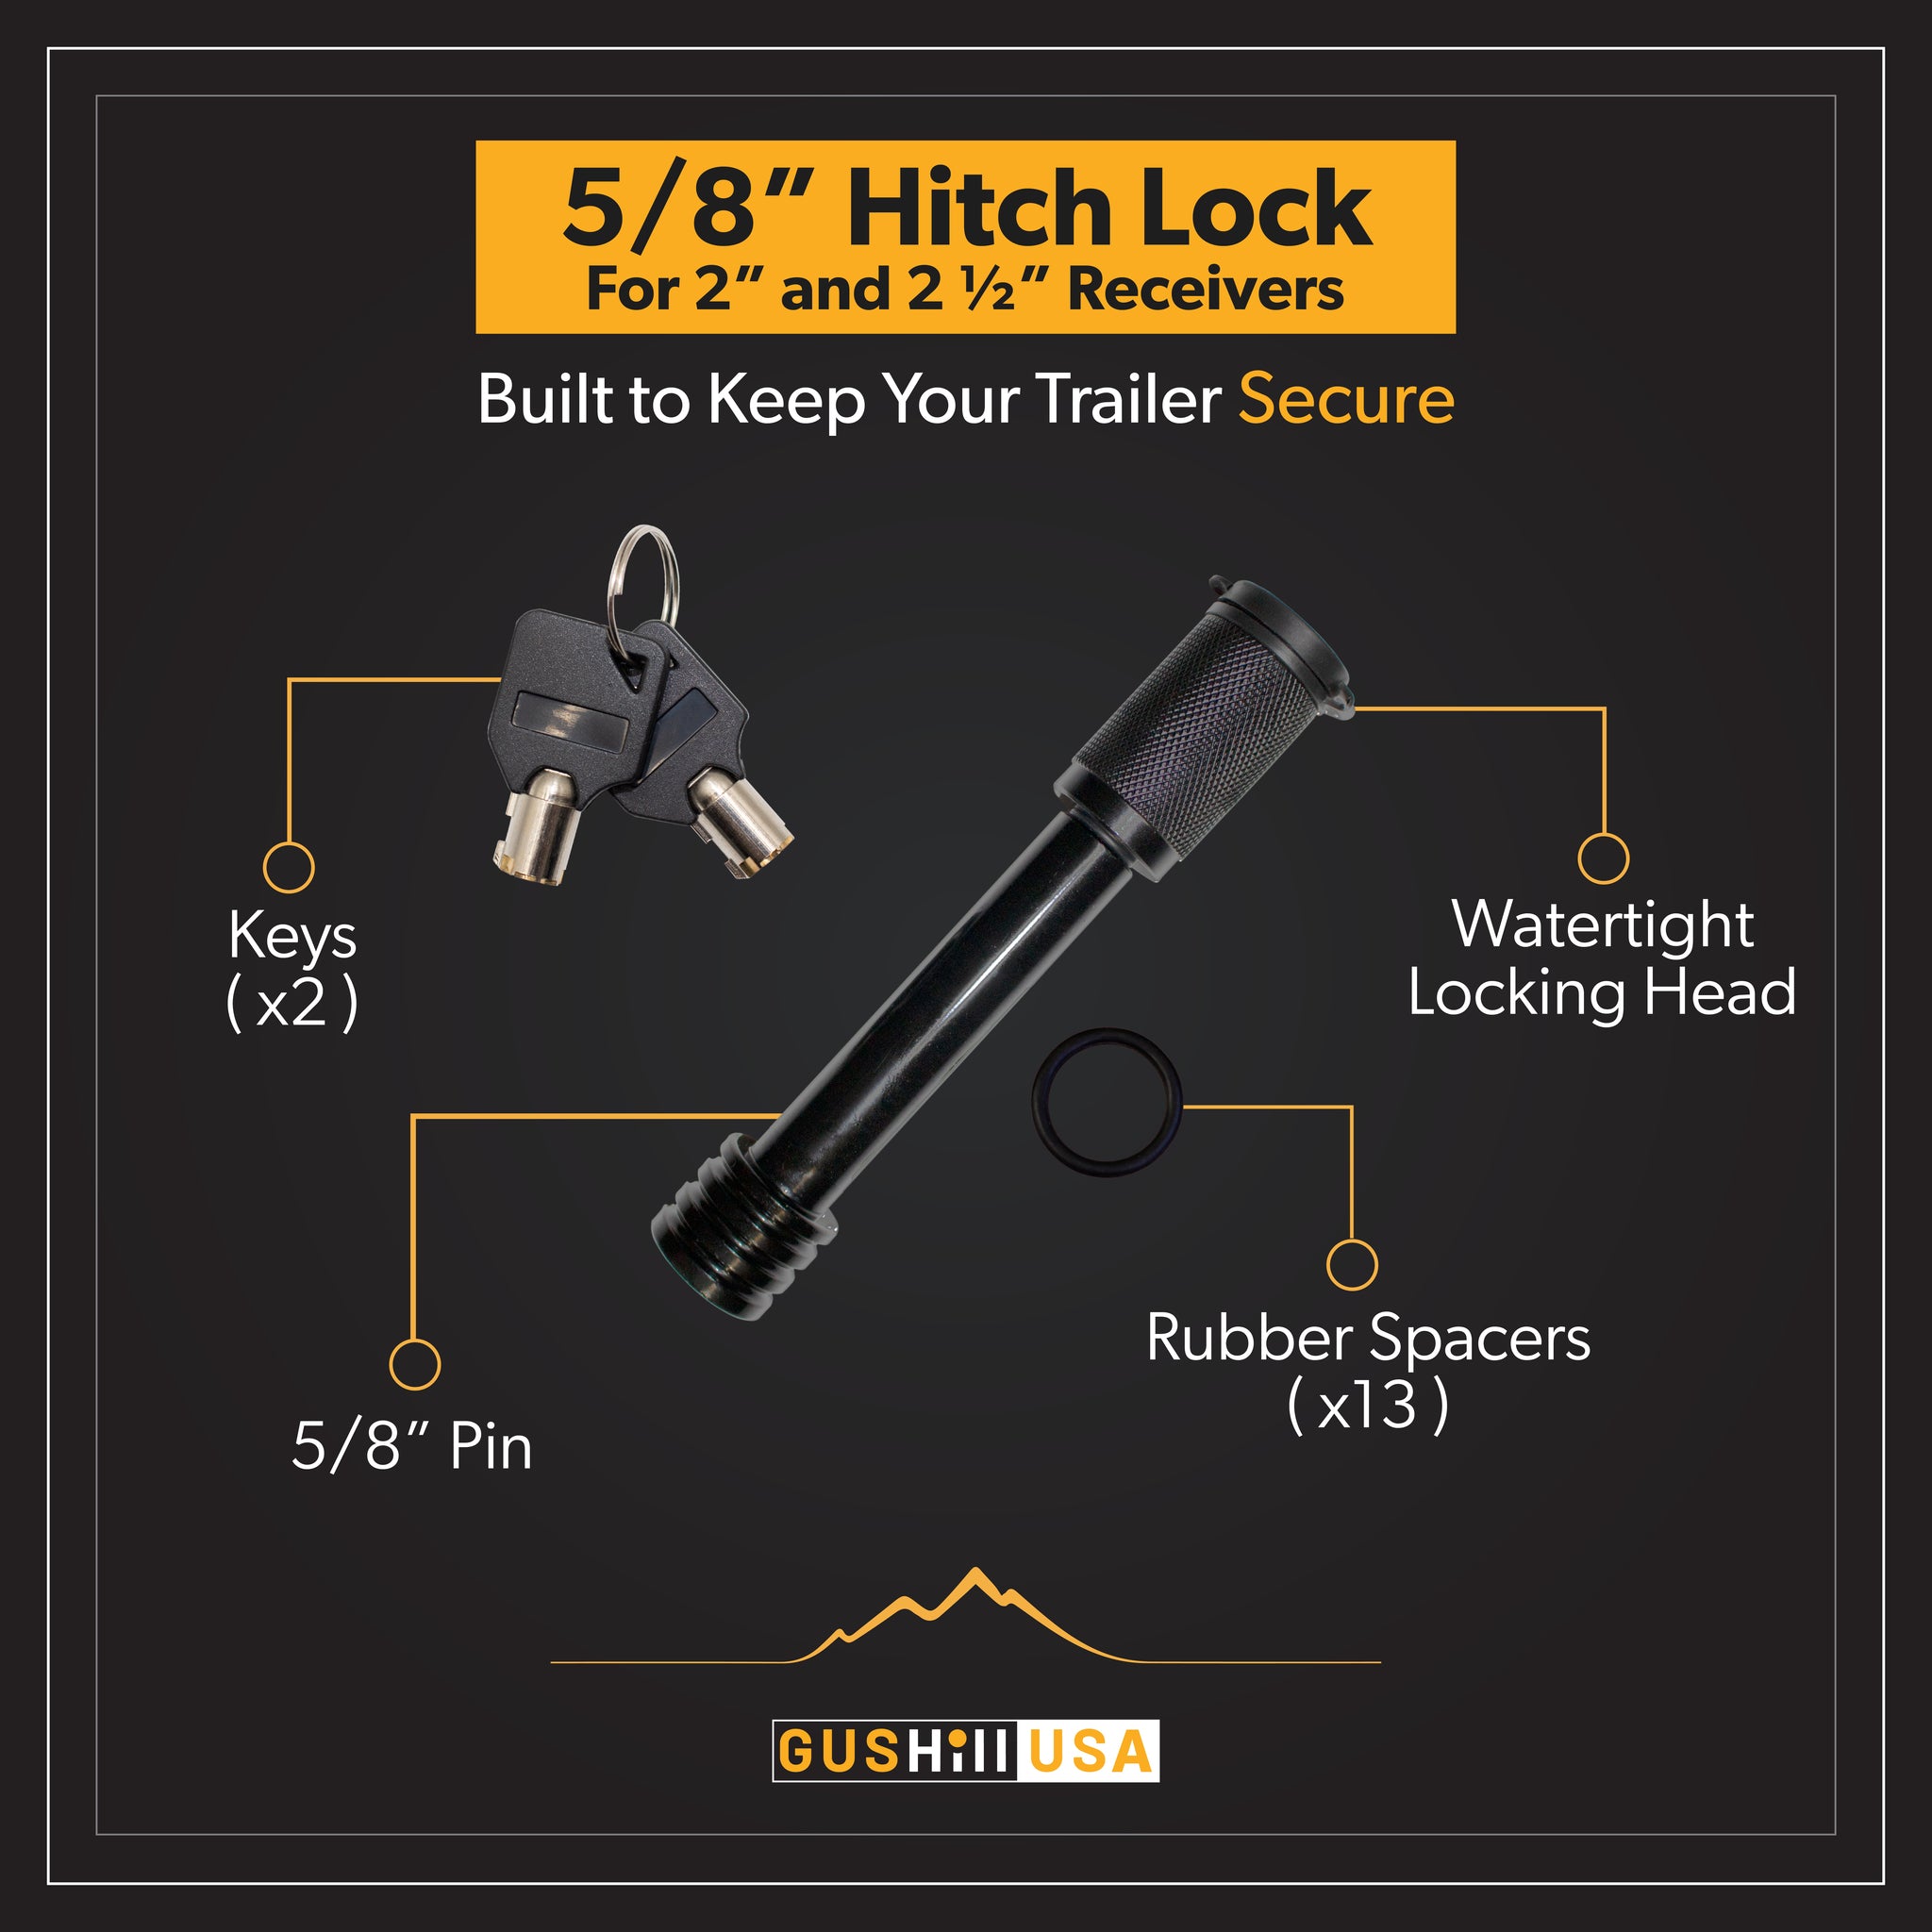 Hitch Lock with 3-1/2" effective length